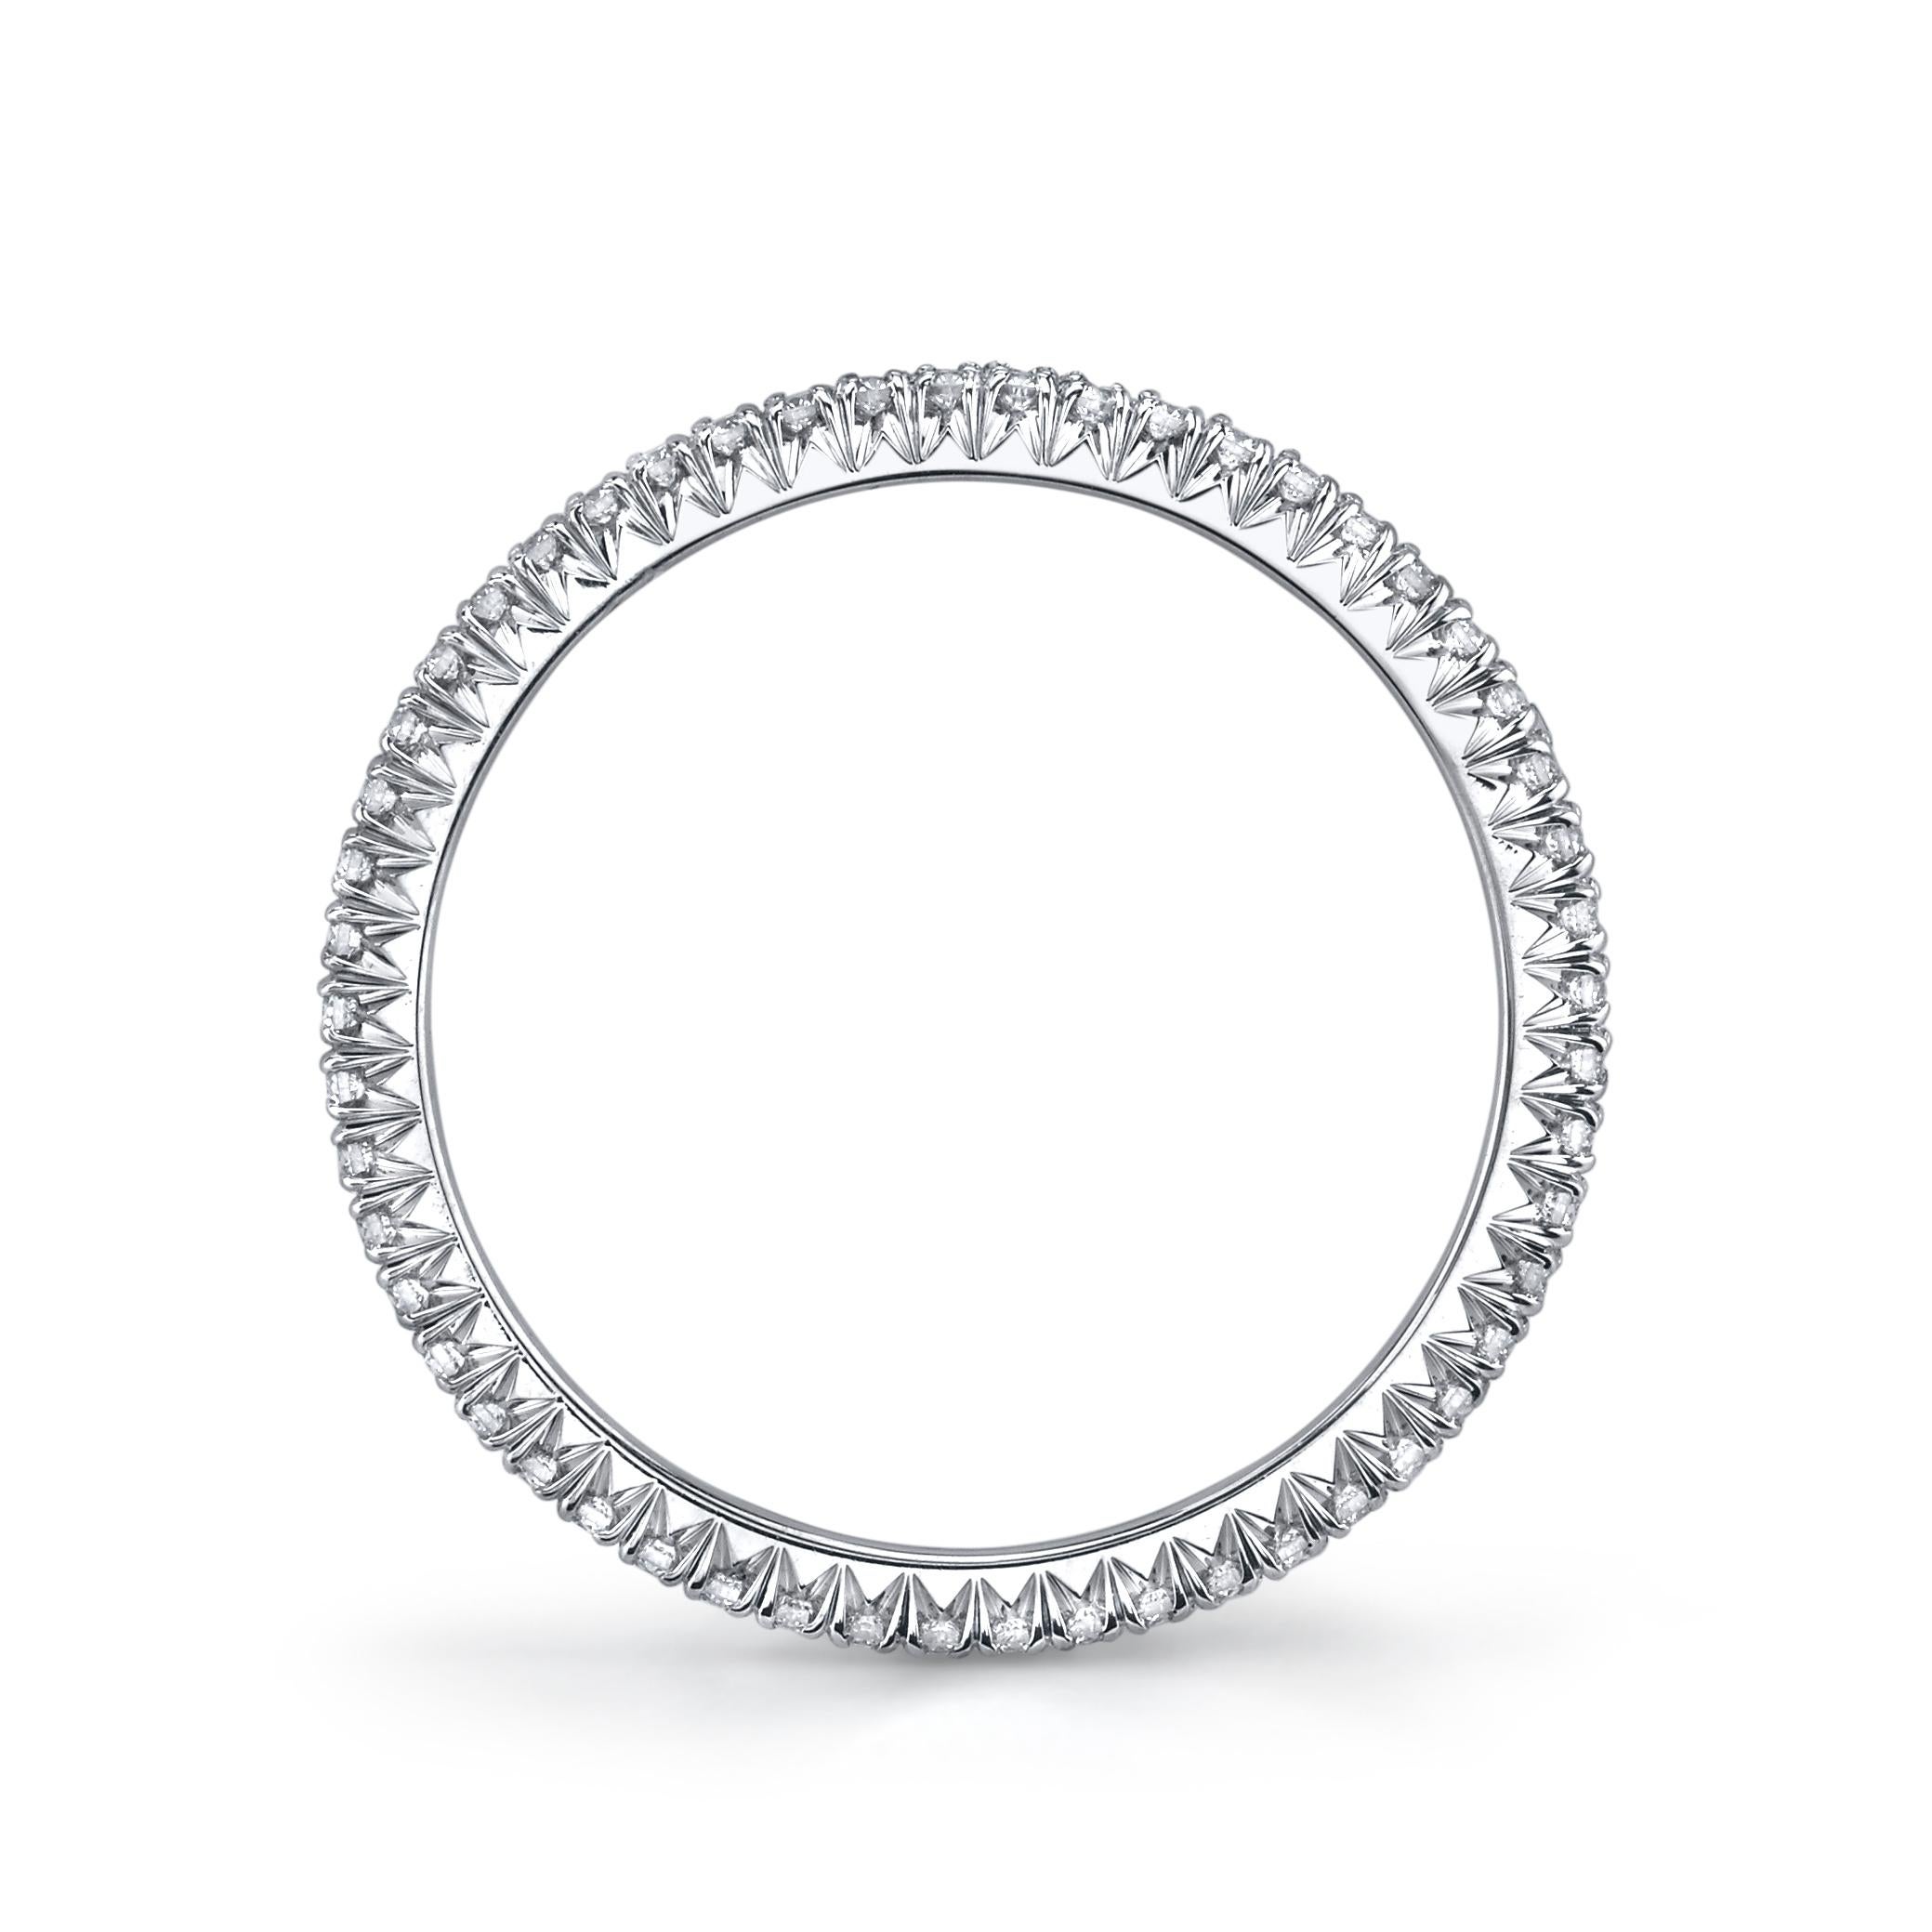 This diamond eternity band is the epitome of timeless elegance and sophistication. With its sleek platinum finish and intricate hearts and arrows design, this ring is a true statement piece. Each of the diamonds has been meticulously cut to ensure